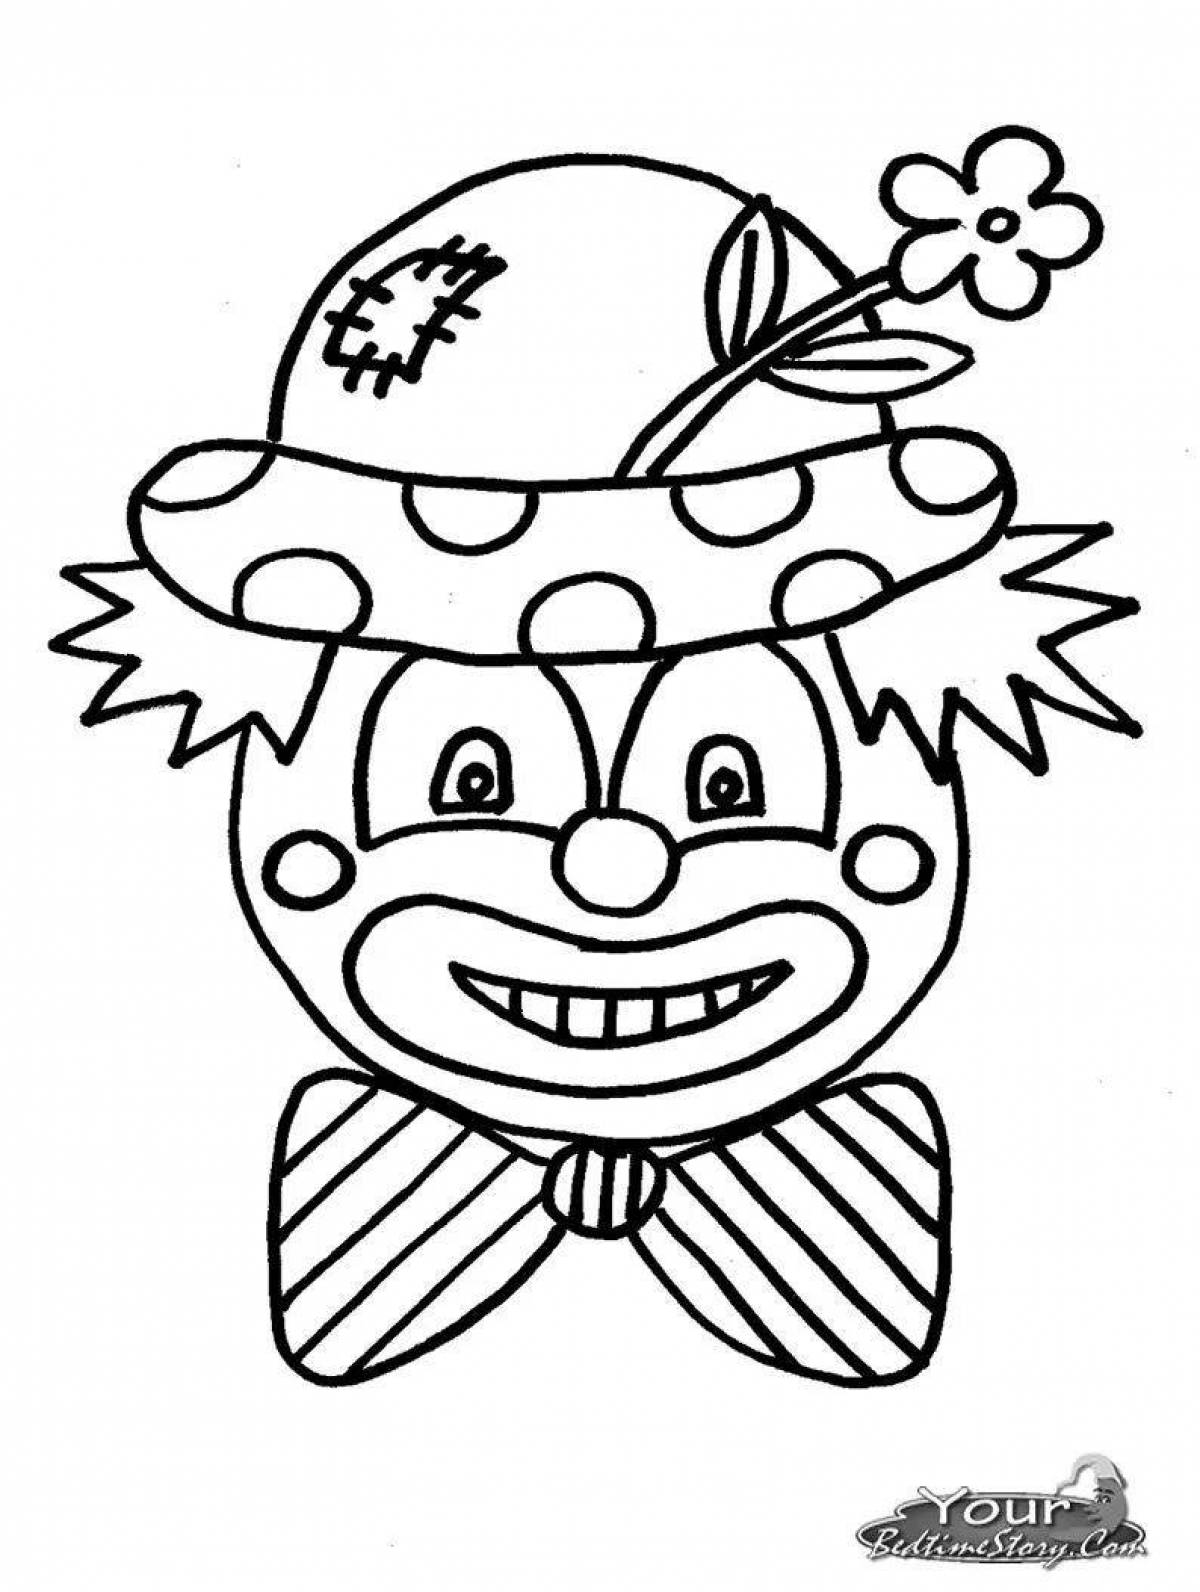 Friendly clown coloring page